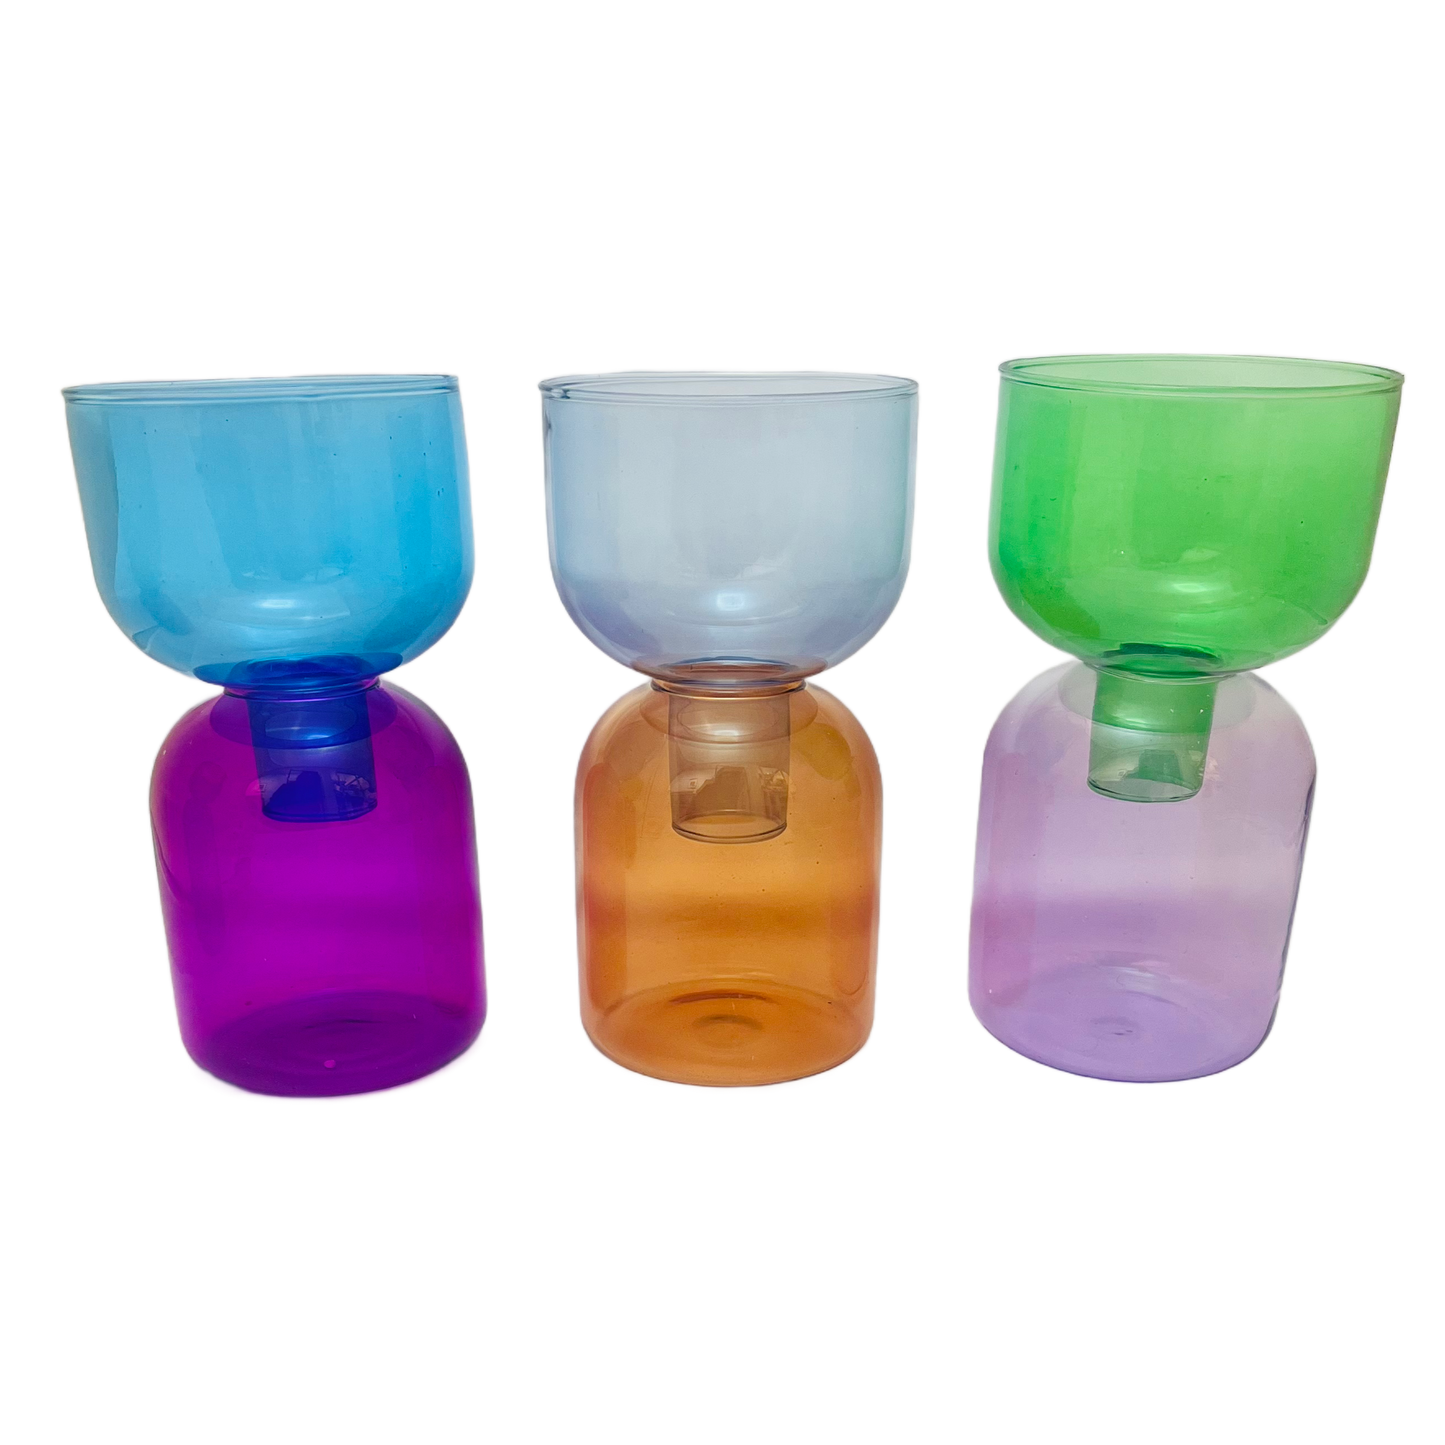 Bellezza Vetro Stacking Multicolored Glass Candle Holder and Vase